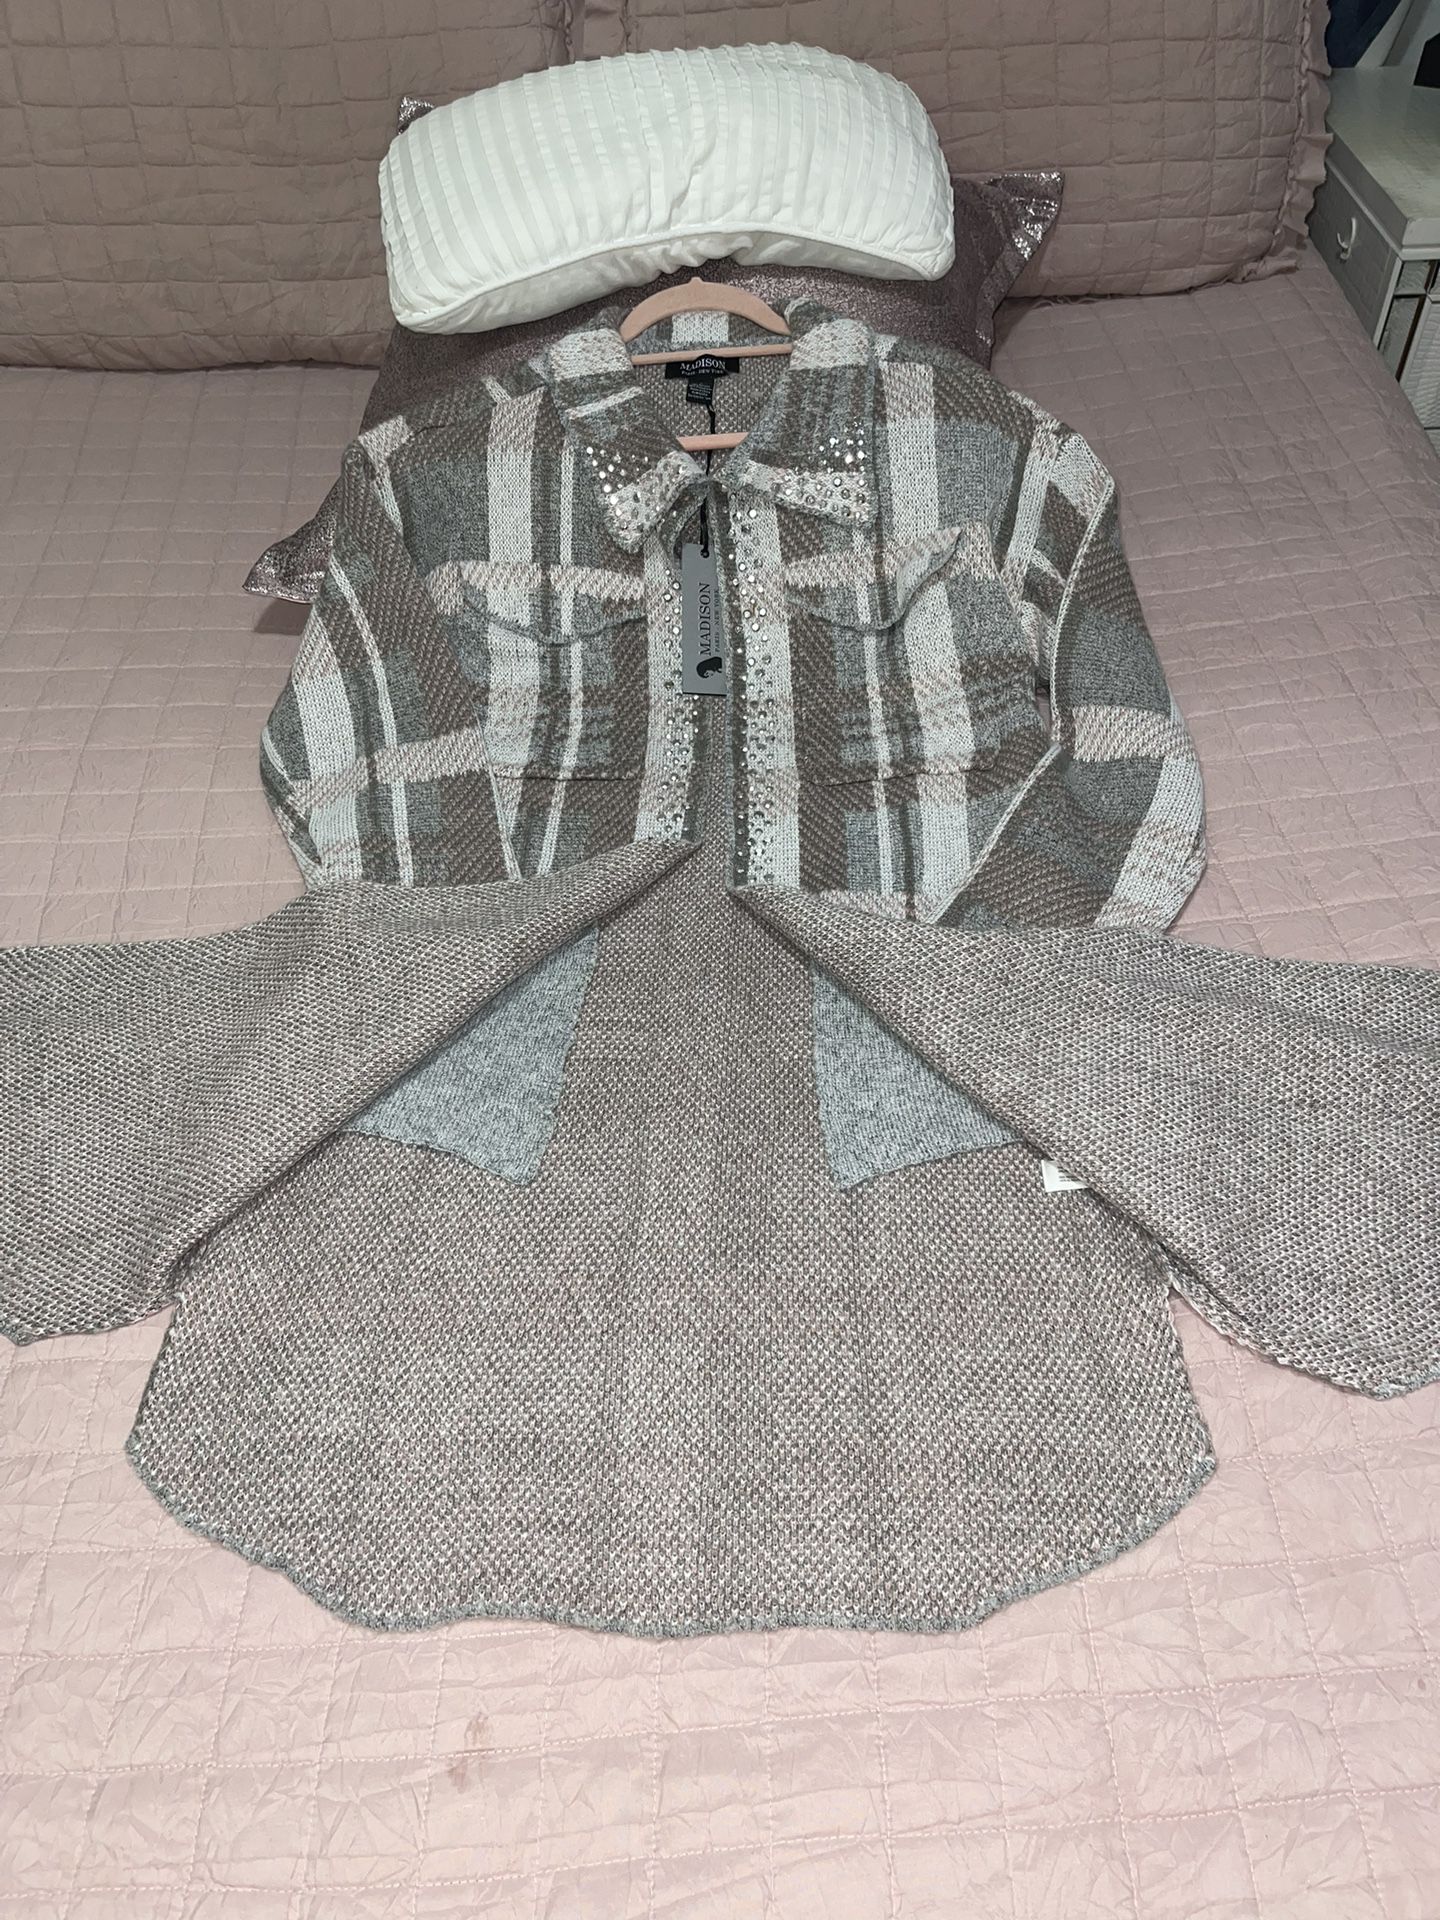 Madison Paris New York Long Sweaters Cardigan Size Large, With decorative stones And Pokets,. New Whit Tags 